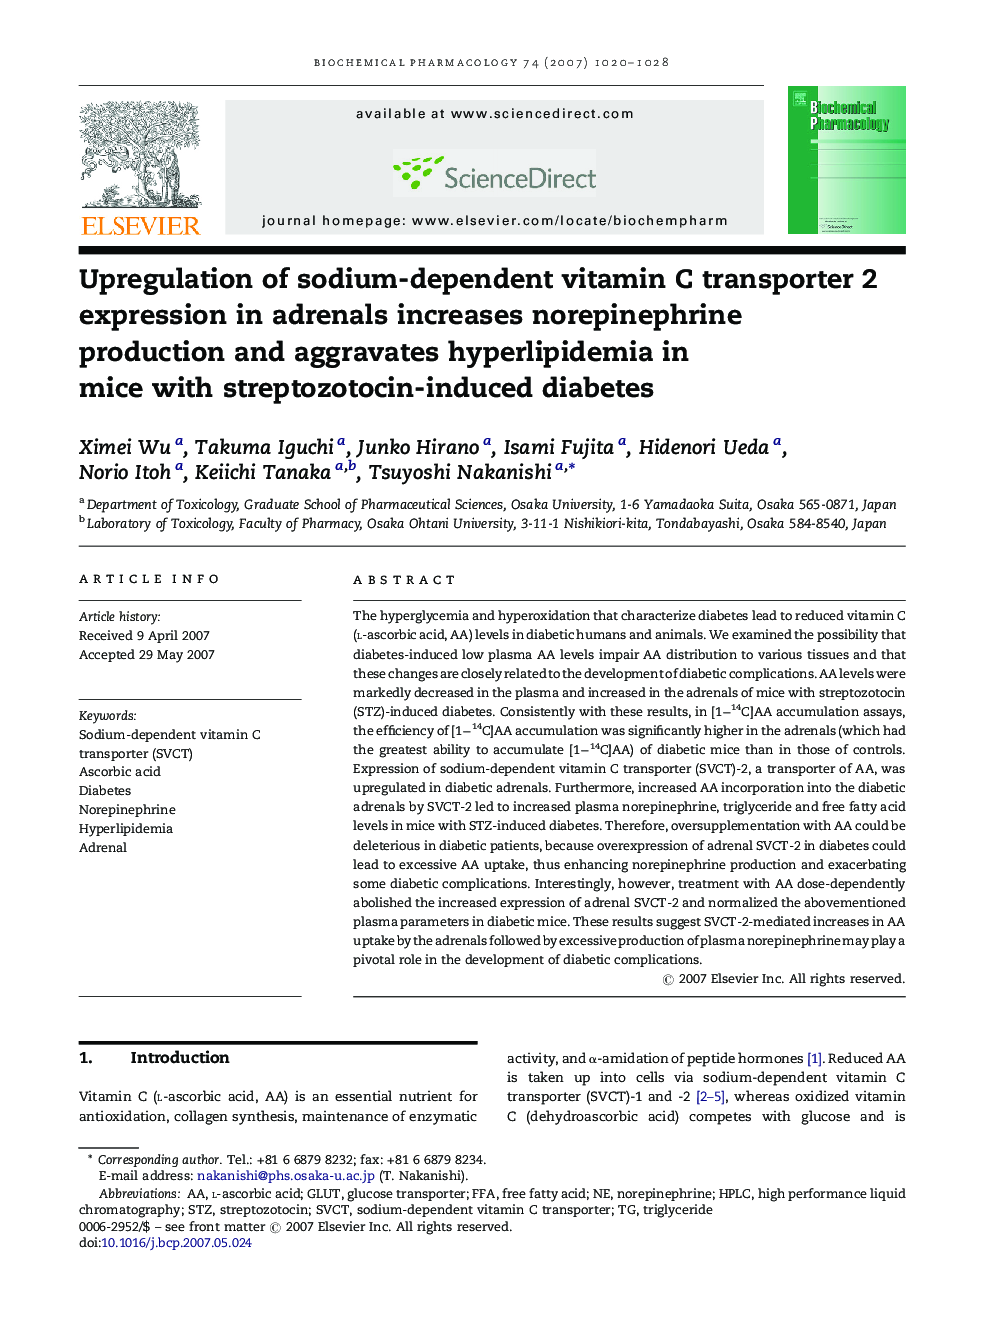 Upregulation of sodium-dependent vitamin C transporter 2 expression in adrenals increases norepinephrine production and aggravates hyperlipidemia in mice with streptozotocin-induced diabetes